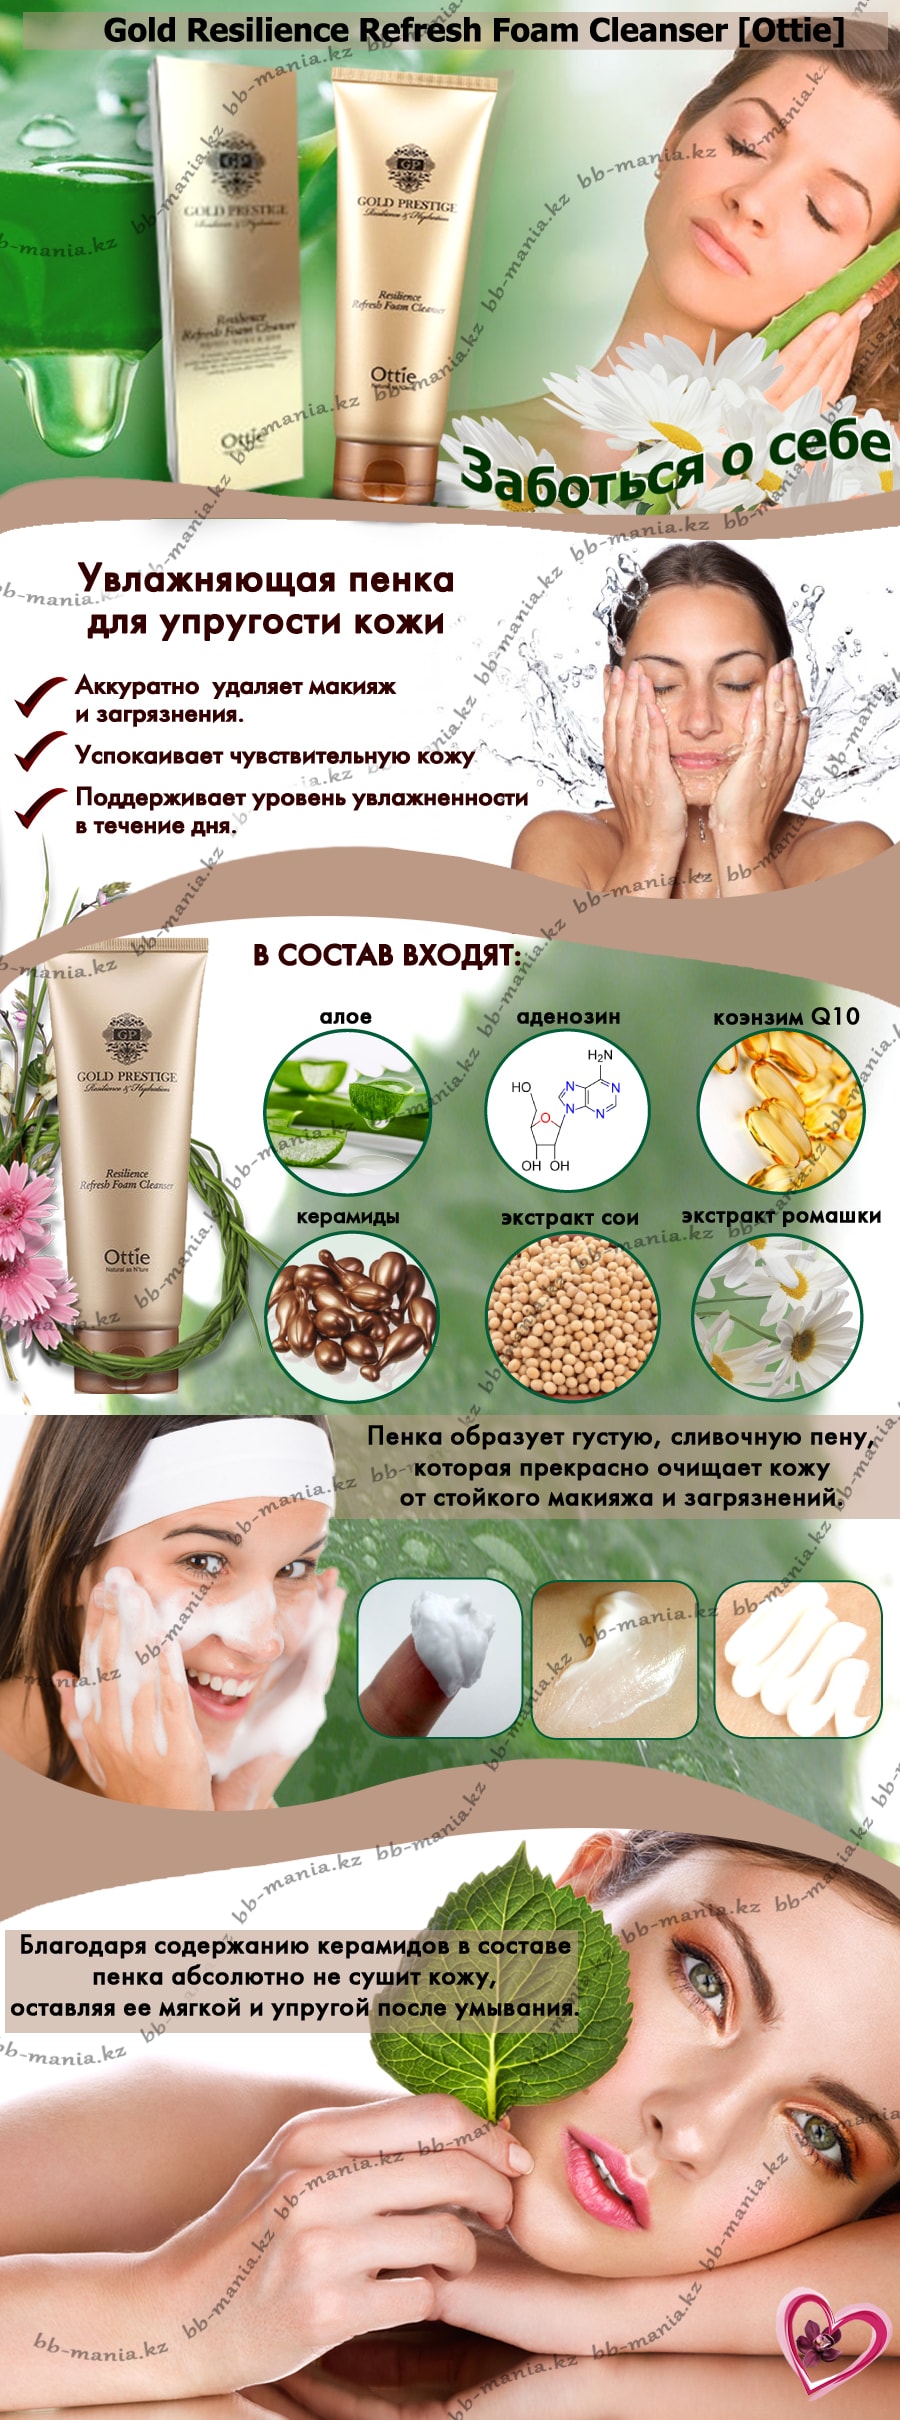 Карточка-отпр-Miniature-Gold-Resilience-Refresh-Foam-Cleanser (1)-min